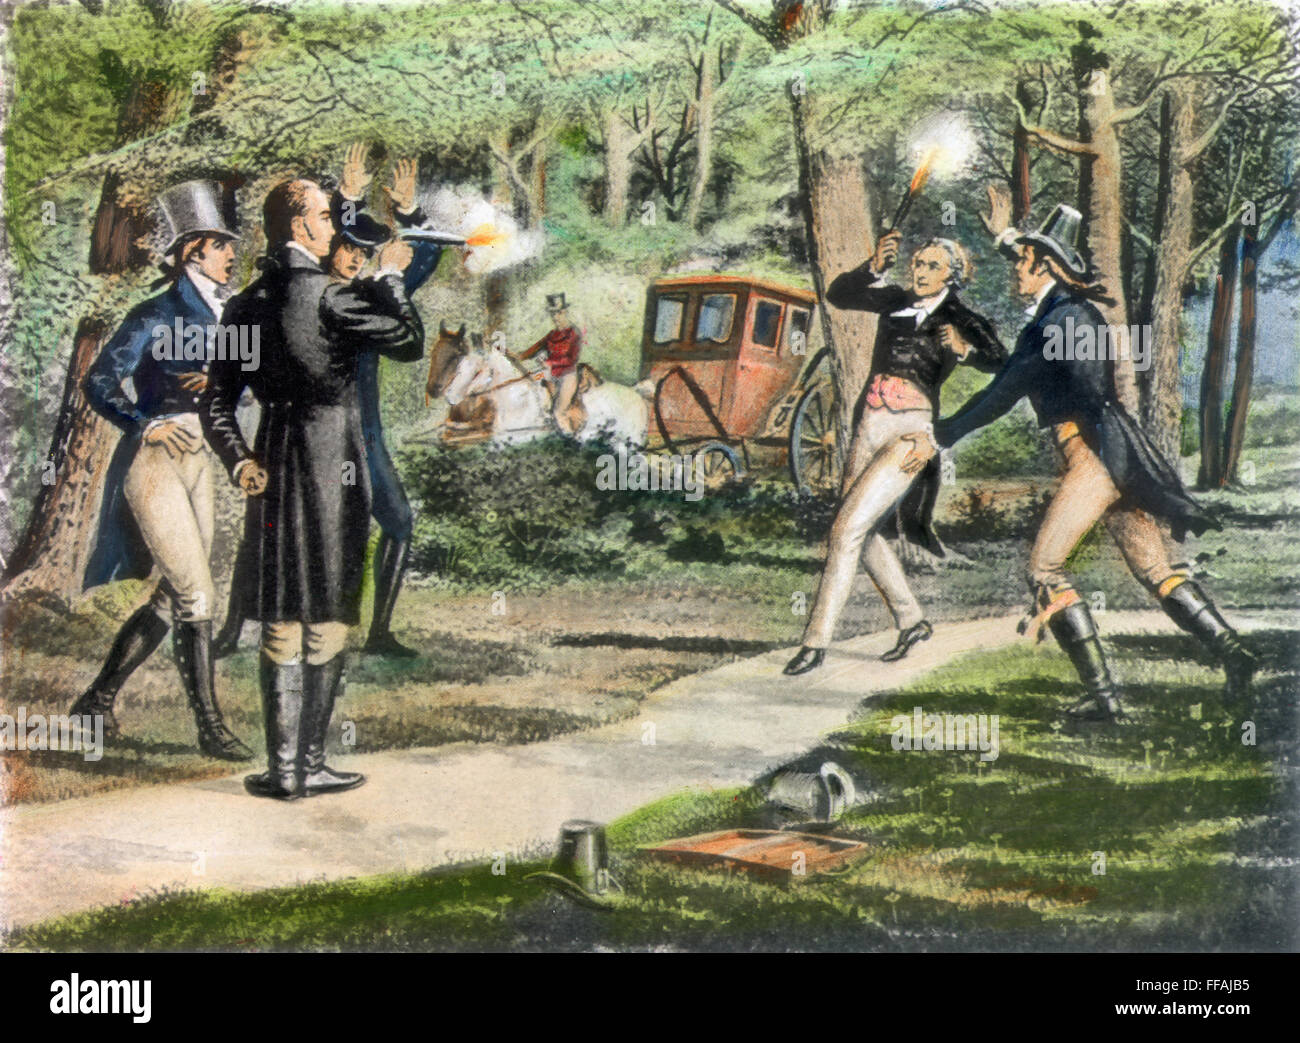 HAMILTON-BURR DUEL, 1804. /nThe duel fought between Alexander Hamilton (right) and Aaron Burr at Weehawken, New Jersey, 11 July 1804, in which Hamilton was fatally wounded. Stock Photo